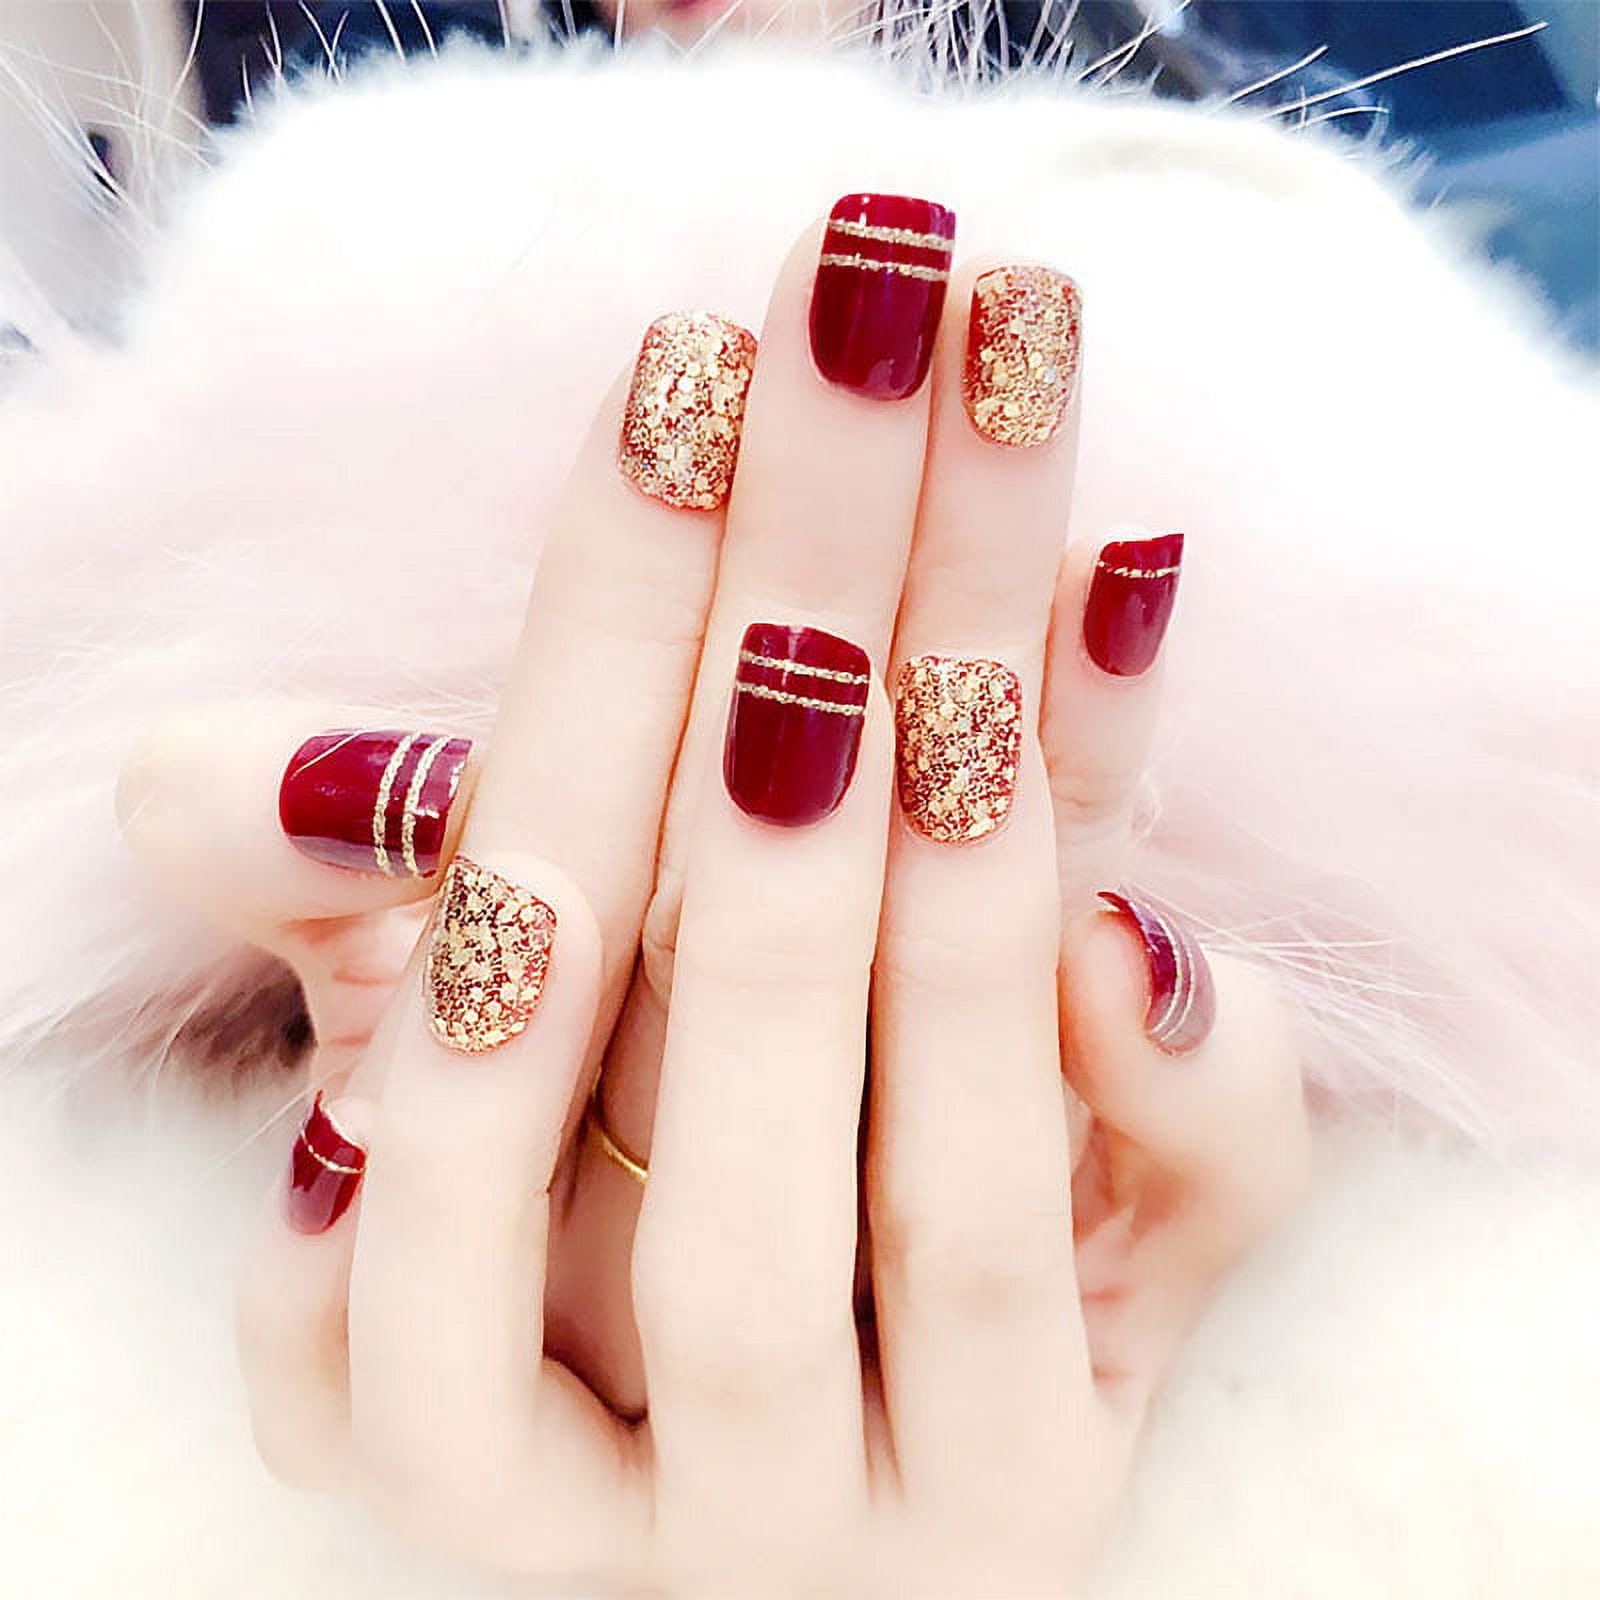 Timeless Red Manicures: Iconic, Seductive, and Always in Style – JINsoon